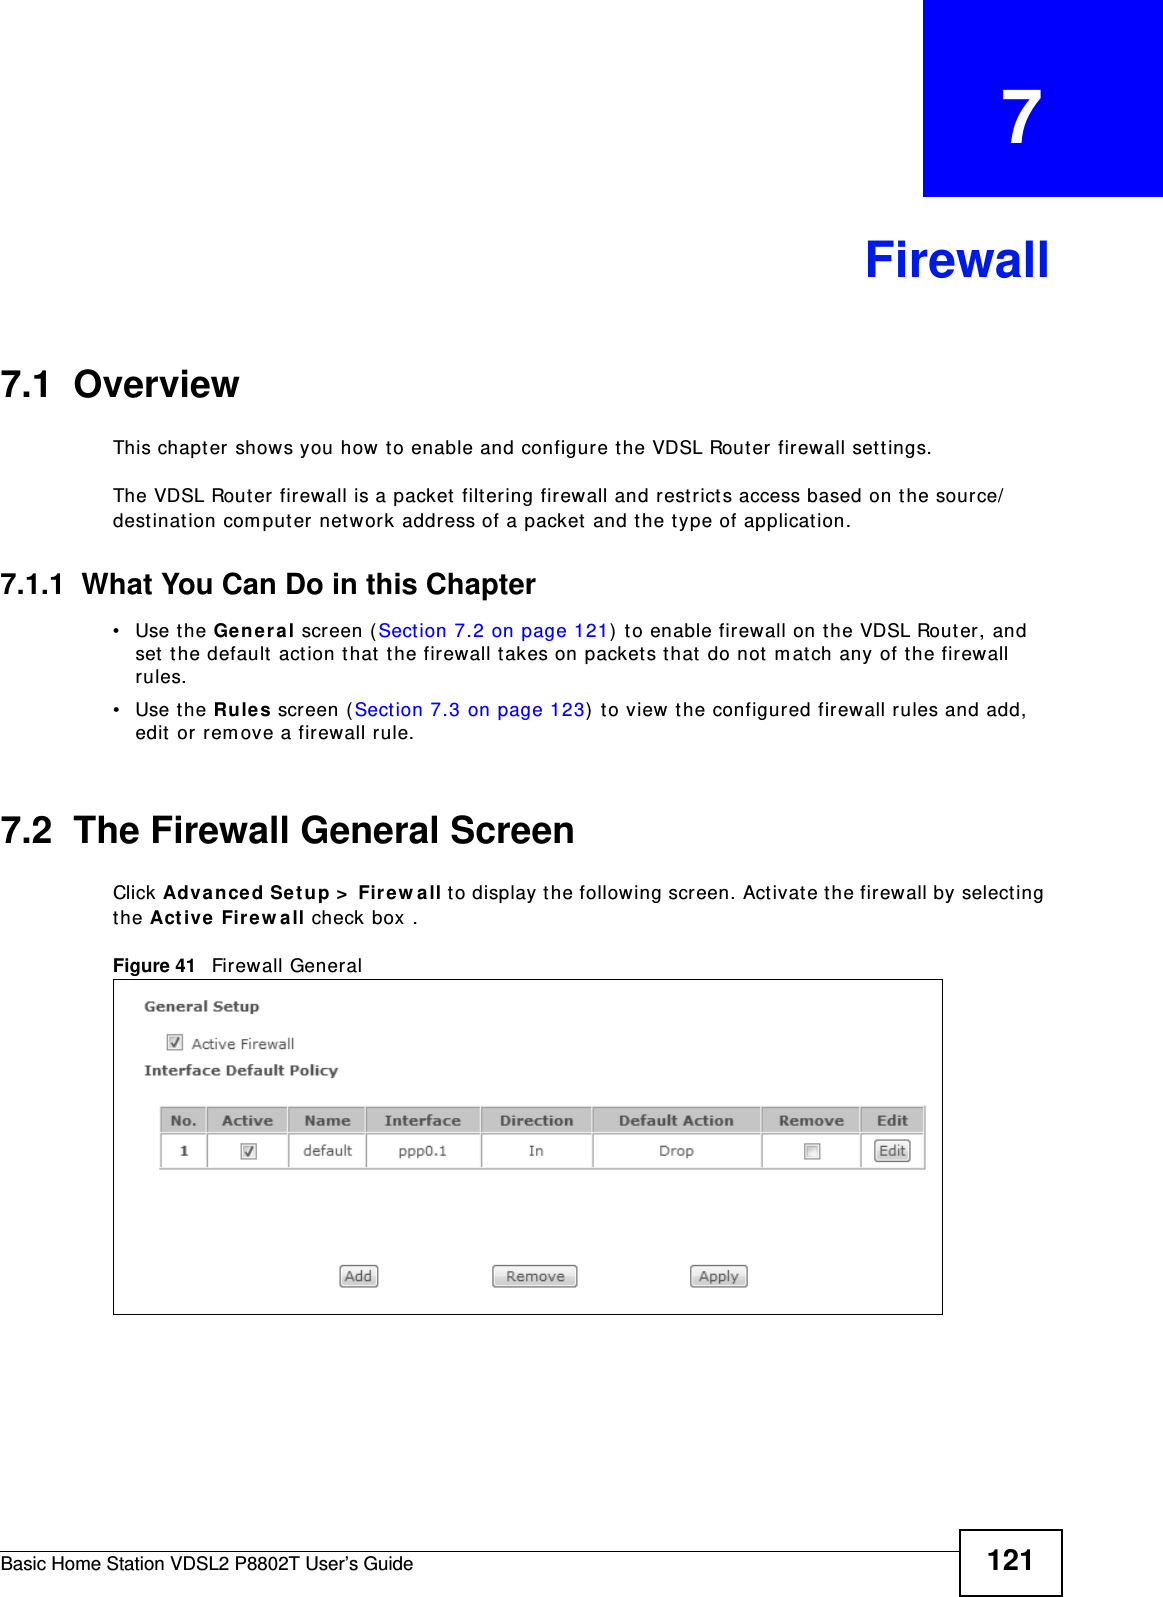 Basic Home Station VDSL2 P8802T User’s Guide 121CHAPTER   7Firewall7.1  Overview This chapt er shows you how t o enable and configure t he VDSL Rout er  firewall set t ings.The VDSL Router firewall is a packet filt ering firewall and restricts access based on t he source/dest ination com put er net work address of a packet  and t he t ype of application. 7.1.1  What You Can Do in this Chapter• Use the Genera l screen (Sect ion 7.2 on page 121)  t o enable firewall on t he VDSL Rout er, and set t he default act ion that t he firewall t akes on packets t hat  do not  m atch any of t he firewall rules.• Use the Rules screen ( Sect ion 7.3 on page 123)  to view t he configur ed firewall rules and add, edit  or rem ove a firewall r ule.7.2  The Firewall General Screen   Click Adva nced Se tup &gt;  Firew all t o display the following screen. Activate t he firewall by select ing the Active Fire w a ll check box .Figure 41   Firewall General